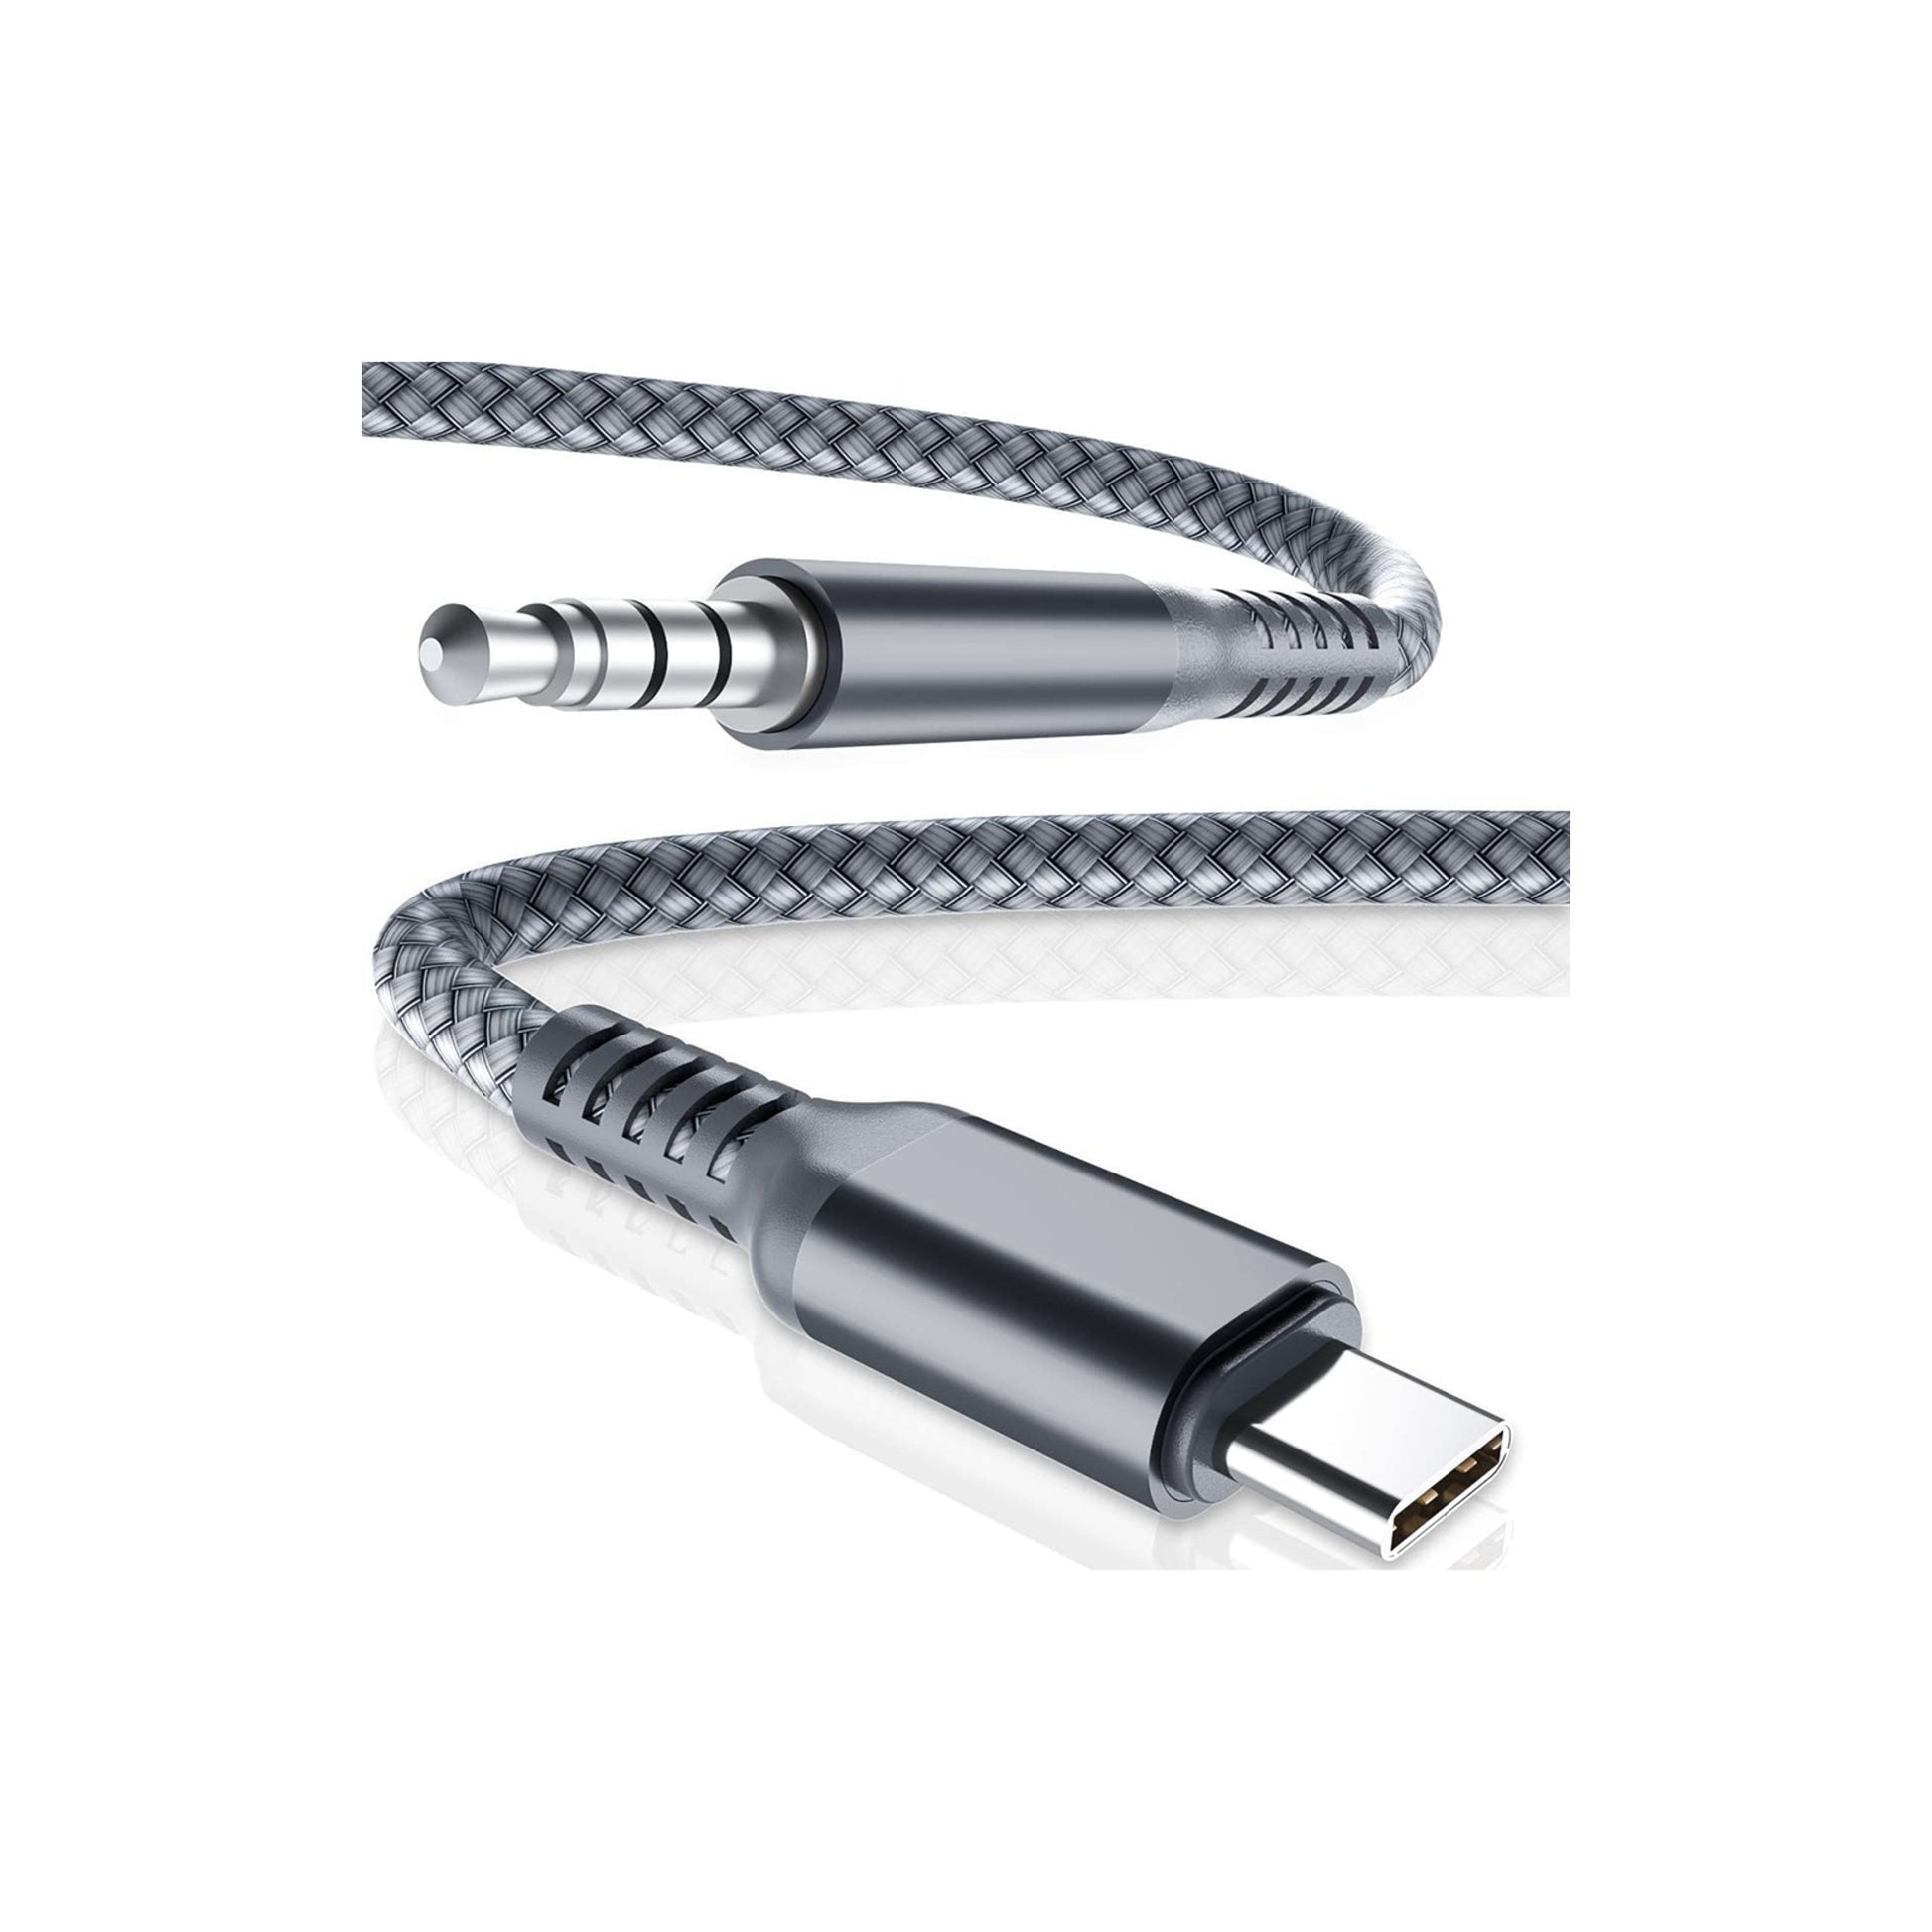 AUX to USB-C Cable